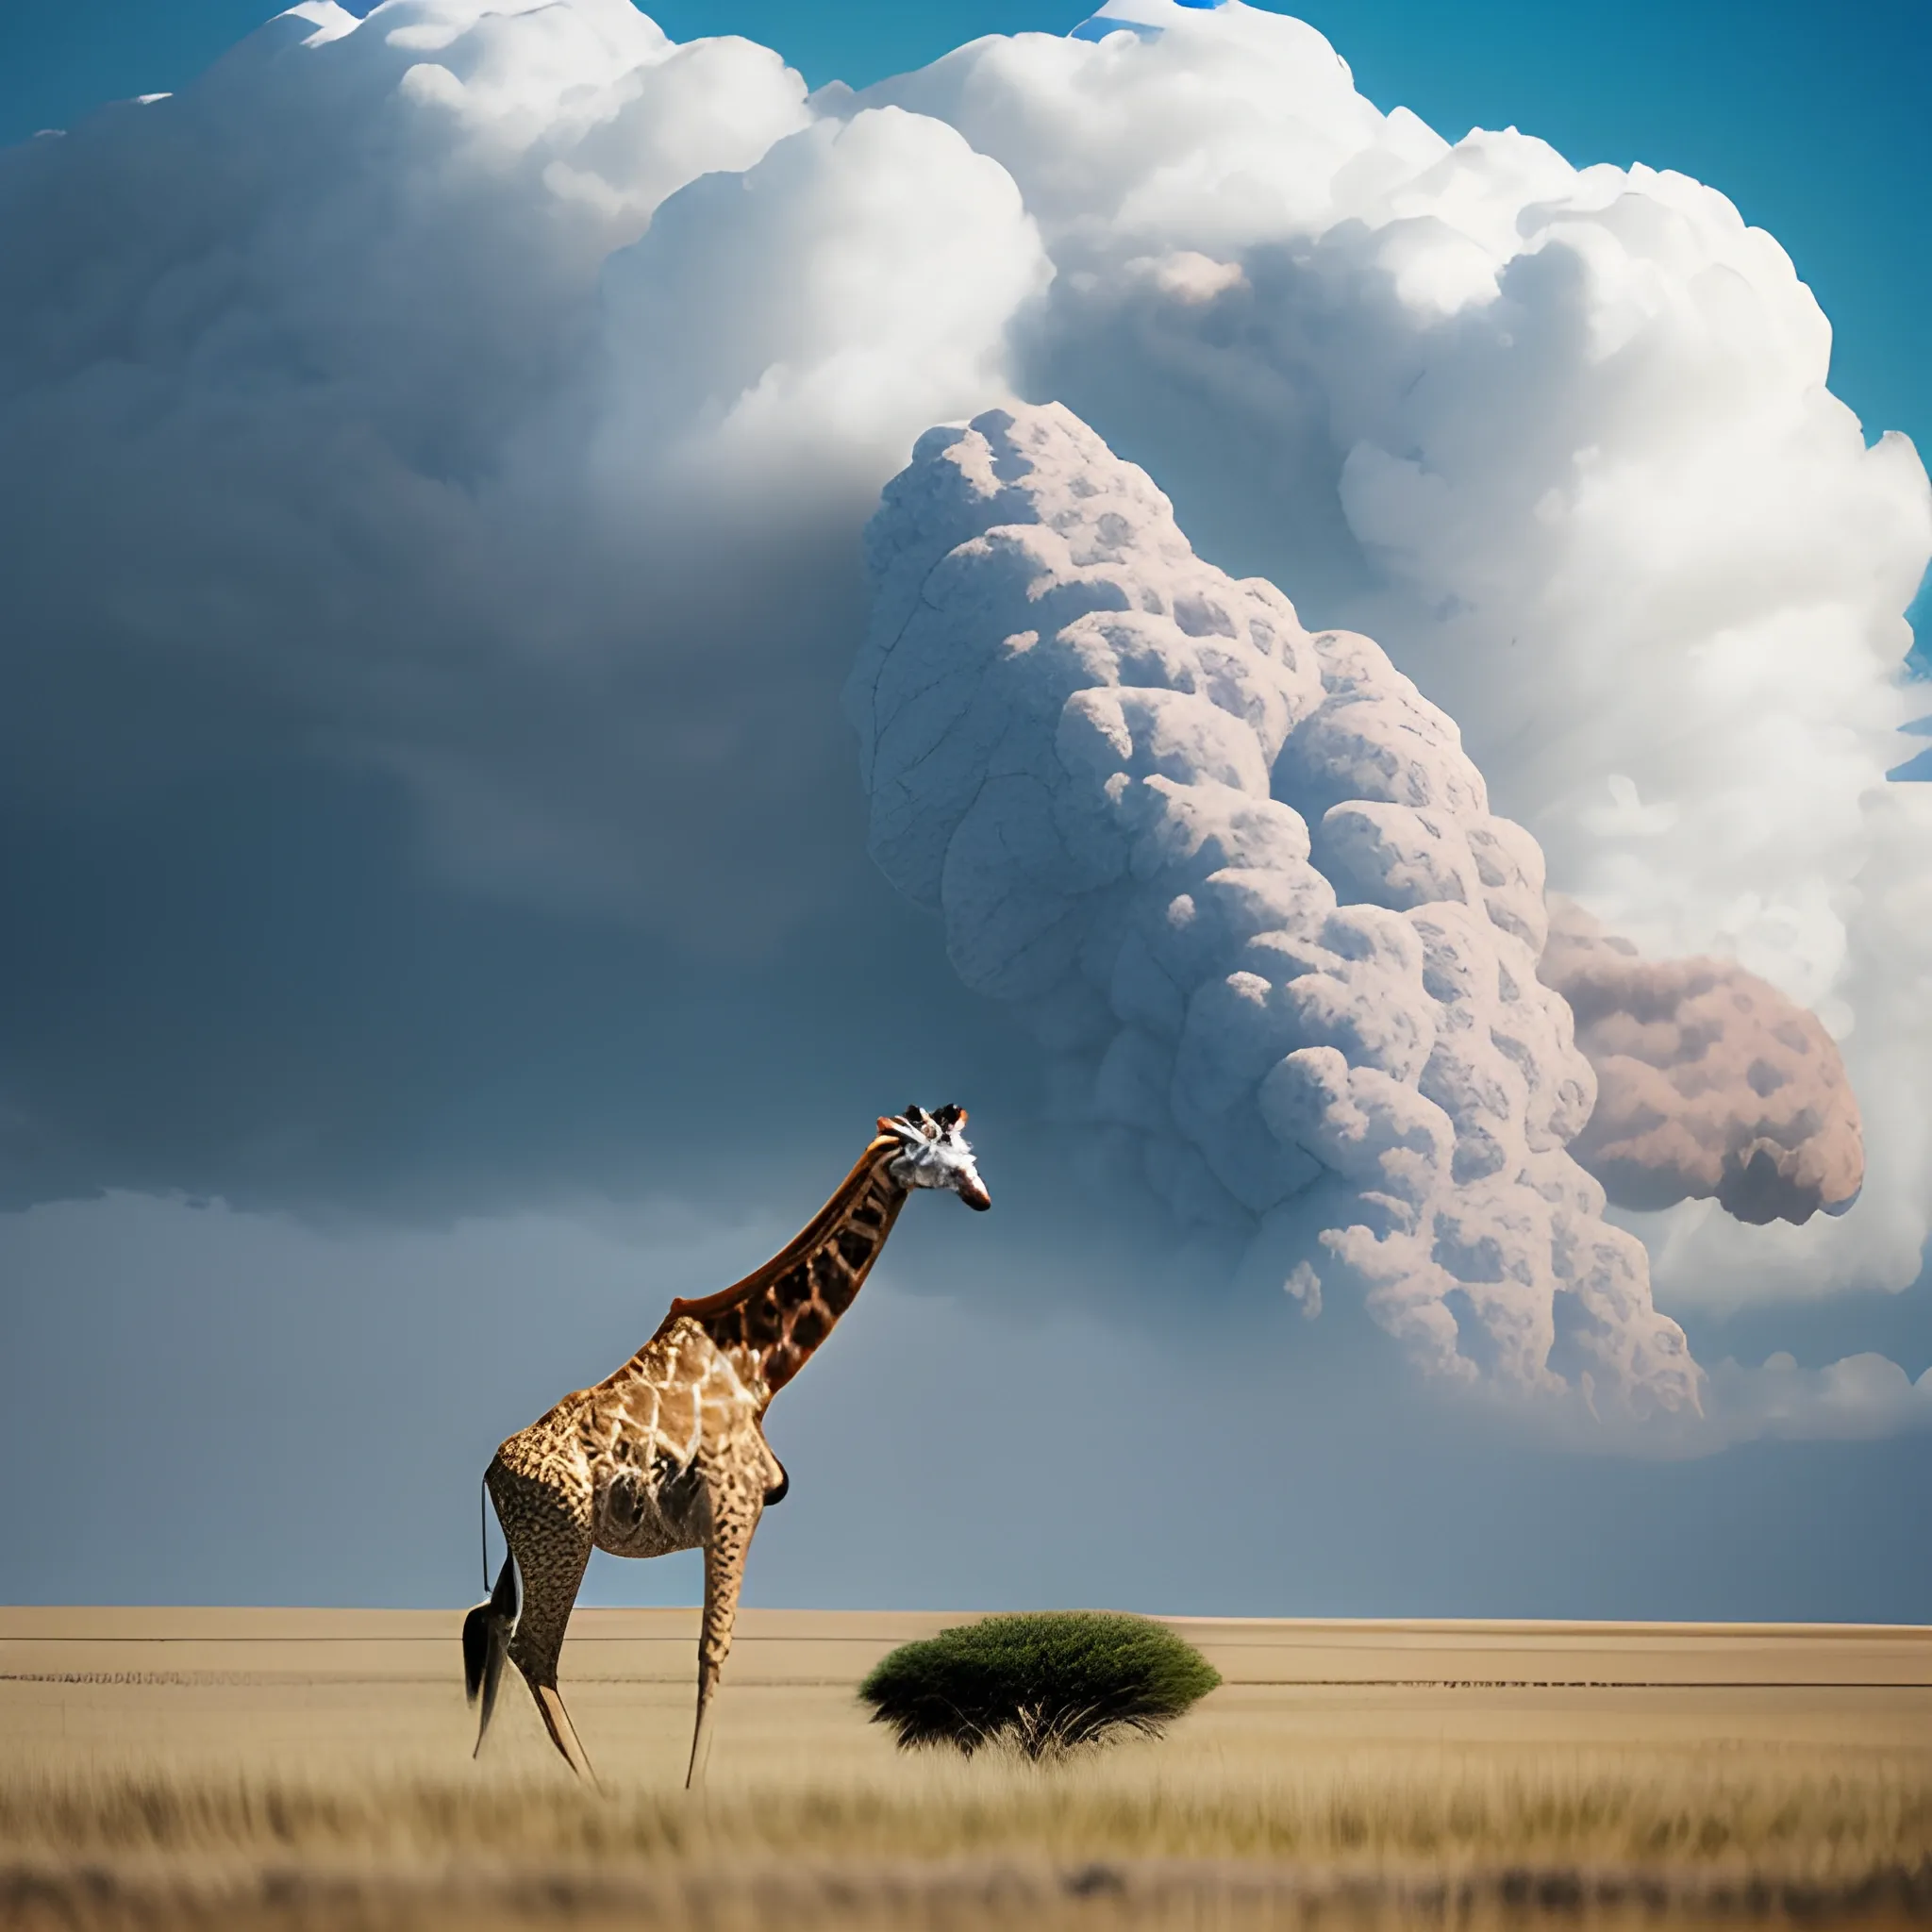 giraffe exploded with clouds, photography